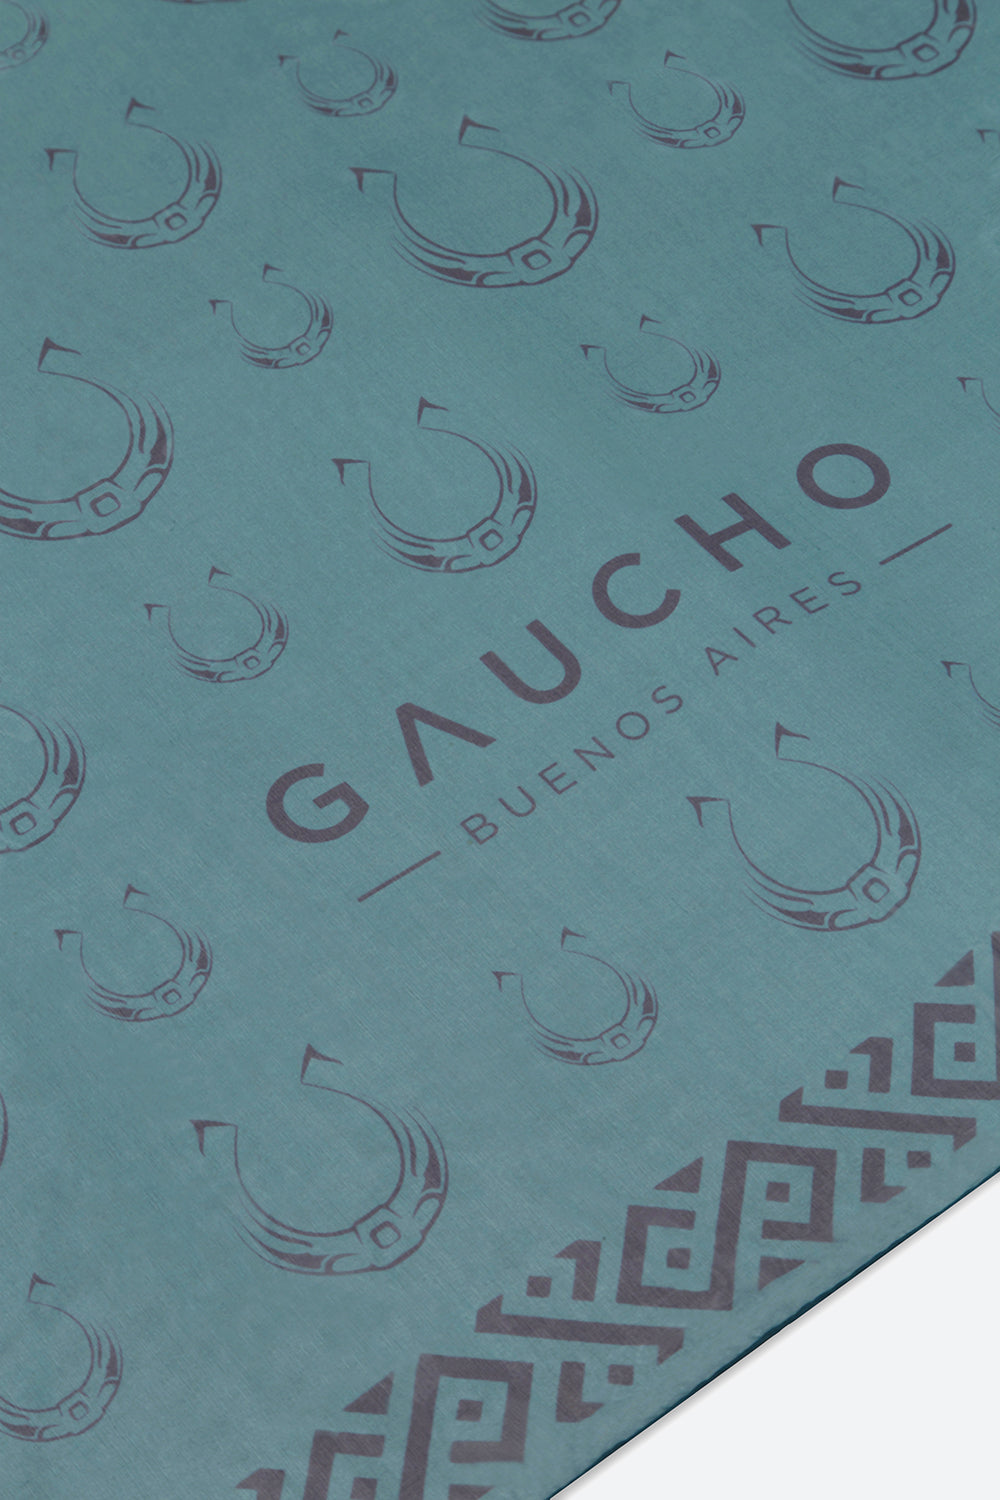 Gaucho Buenos Aires Men's Hand-Finished Icon Silk Scarf